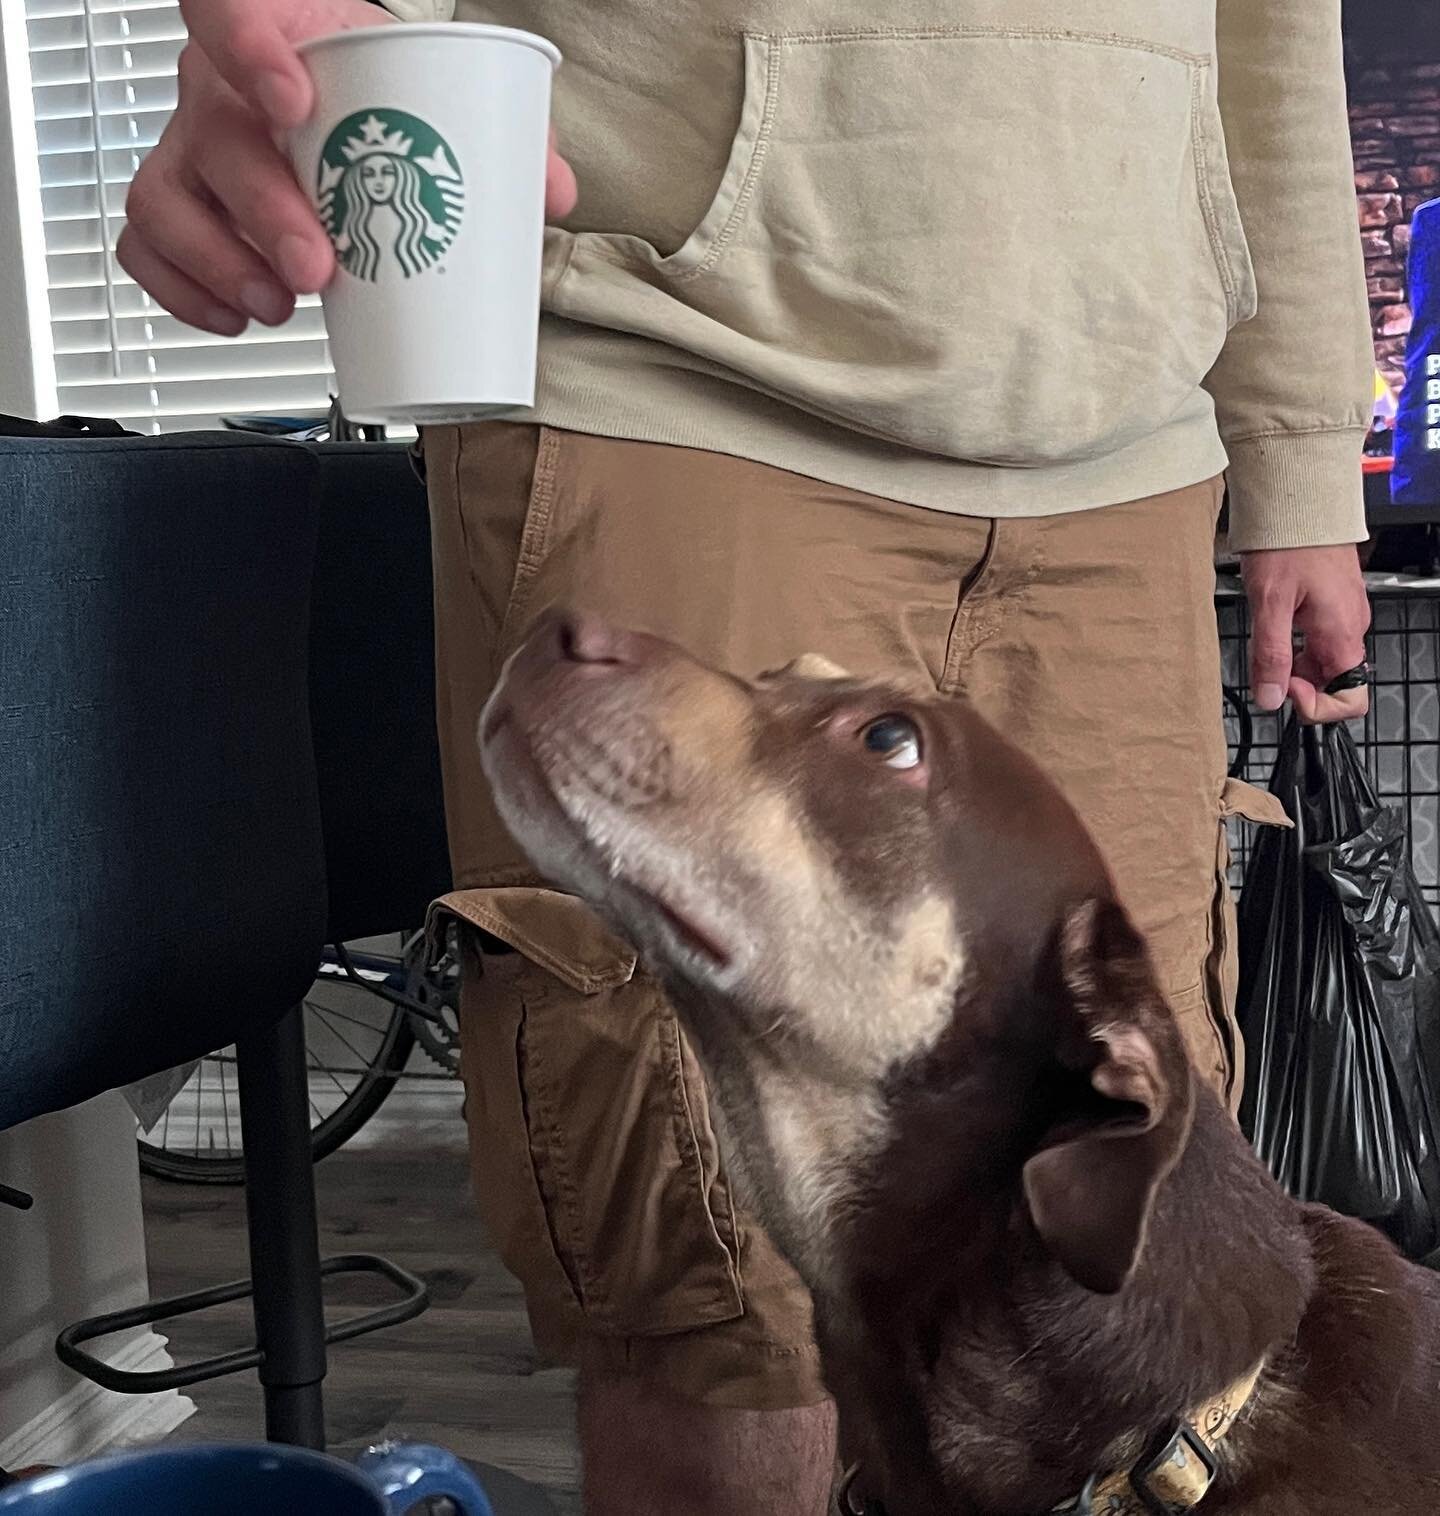 Find someone that looks at you like Nellie looks at her pup cup.